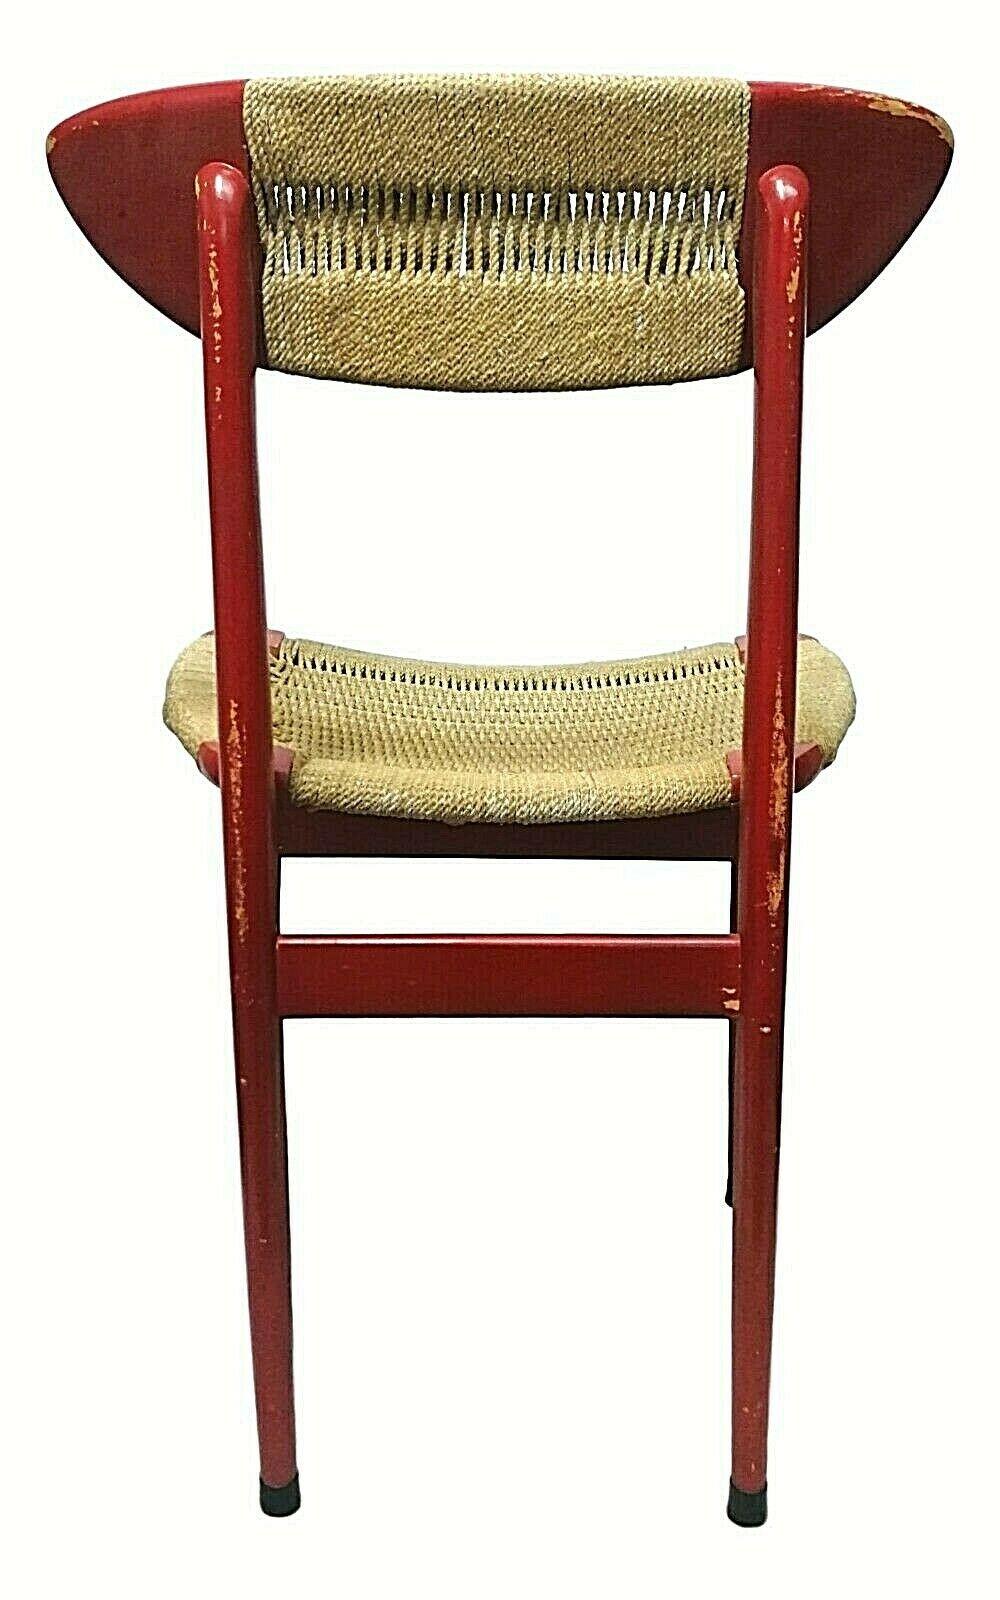 Collection Chair Design Hans Wegner in Wood and Rope, 1950s In Good Condition For Sale In taranto, IT